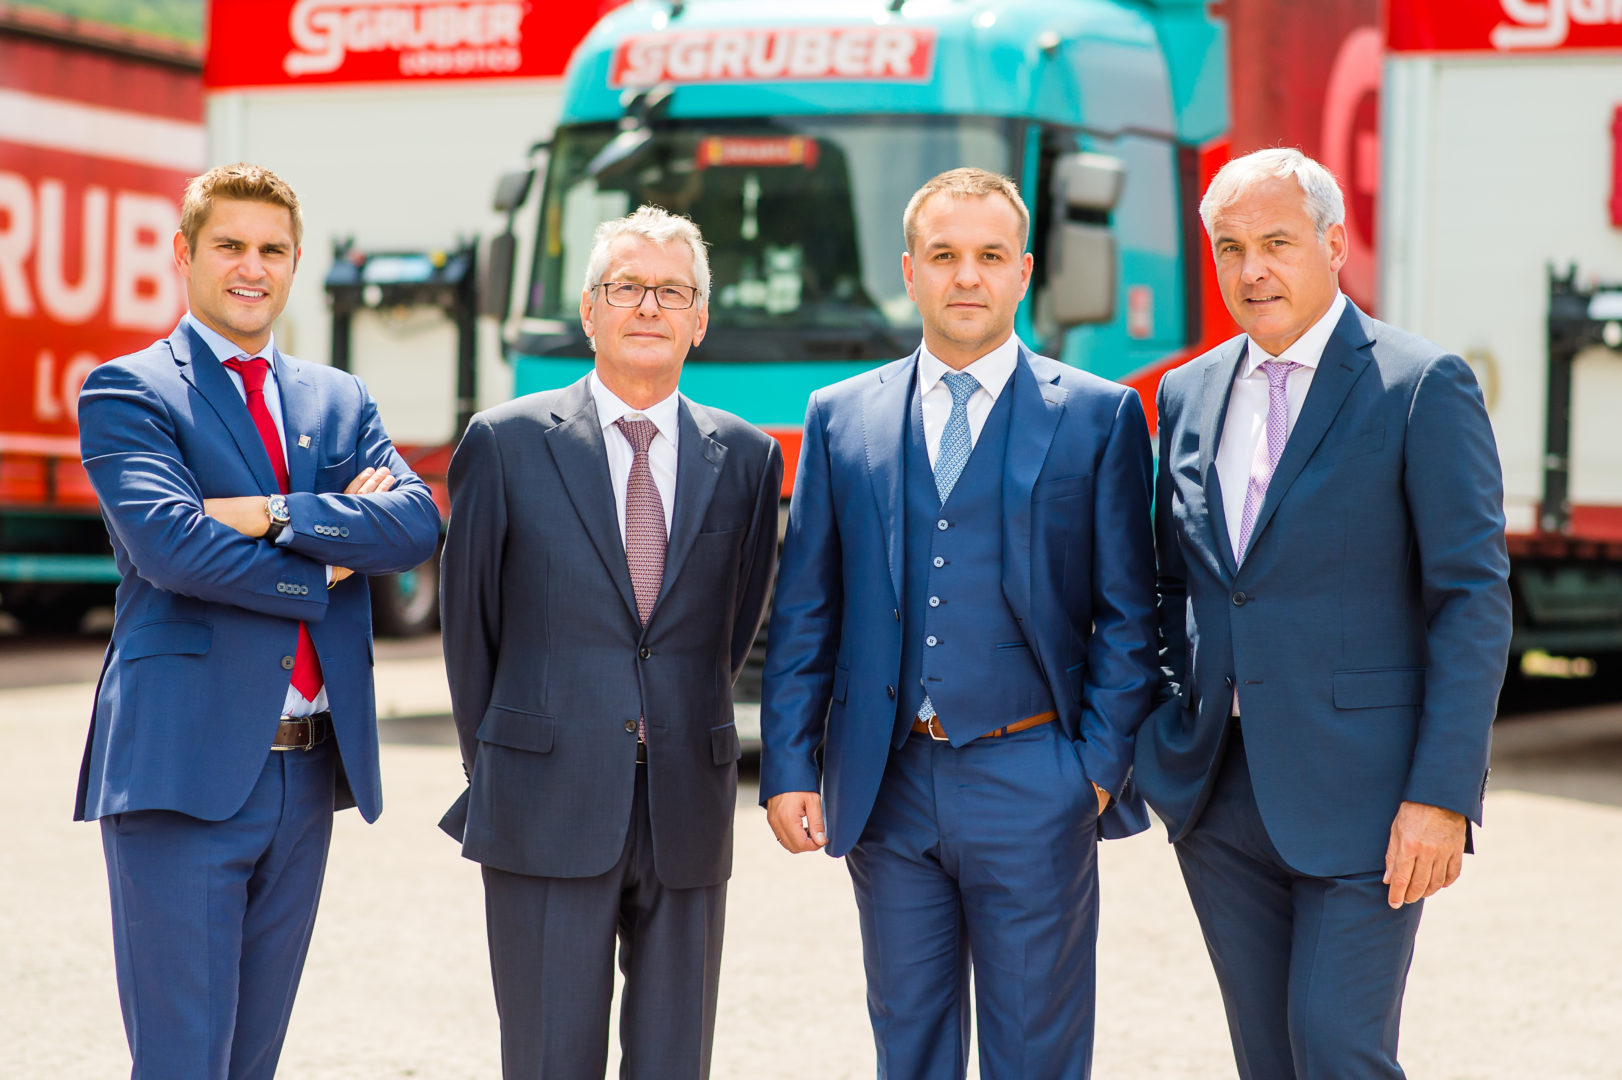 GRUBER Logistics closes 2018 with a turnover of 344 million euros